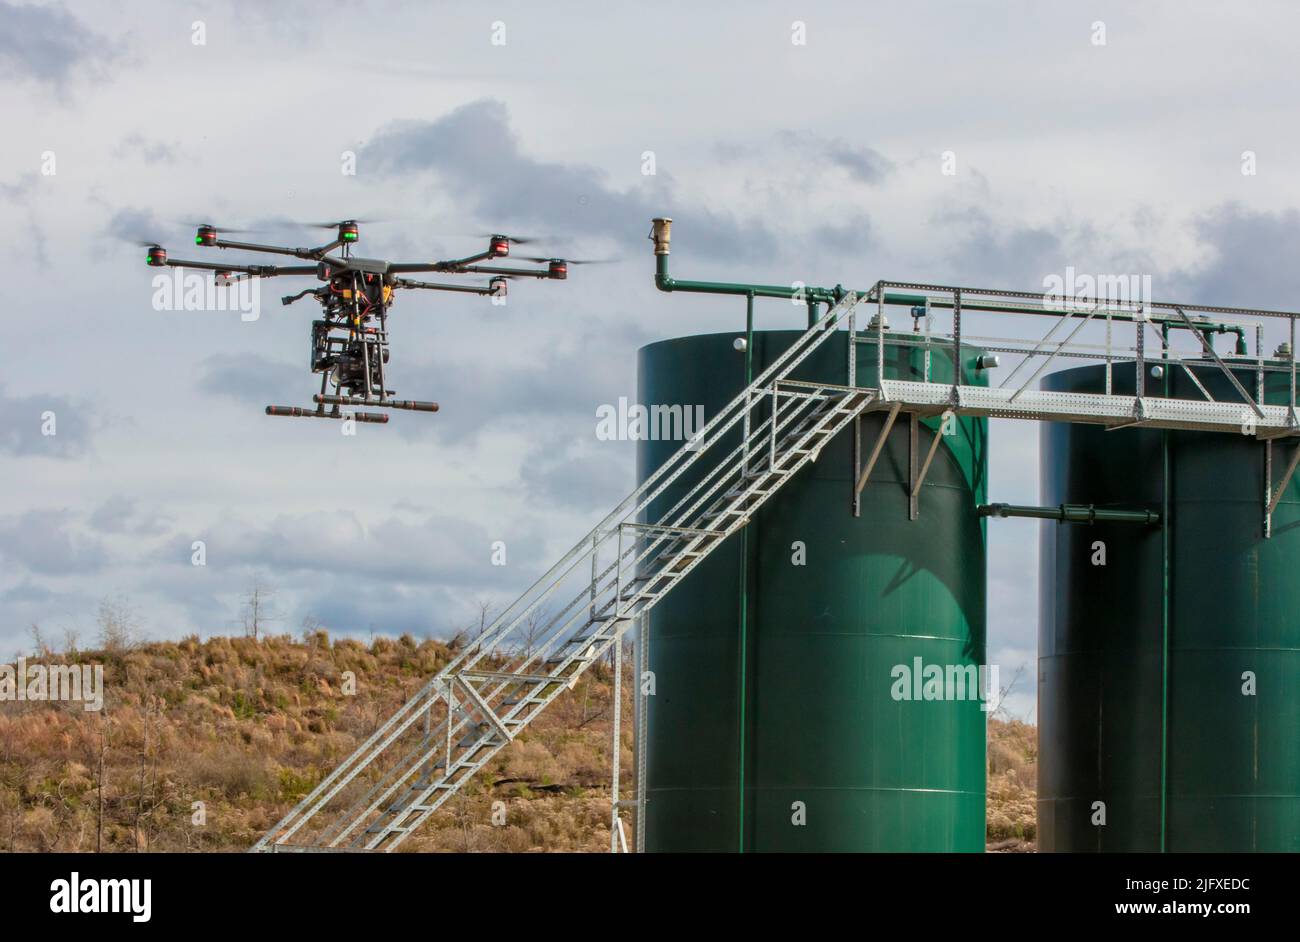 Drone inspects for methane leaks on well site Stock Photo